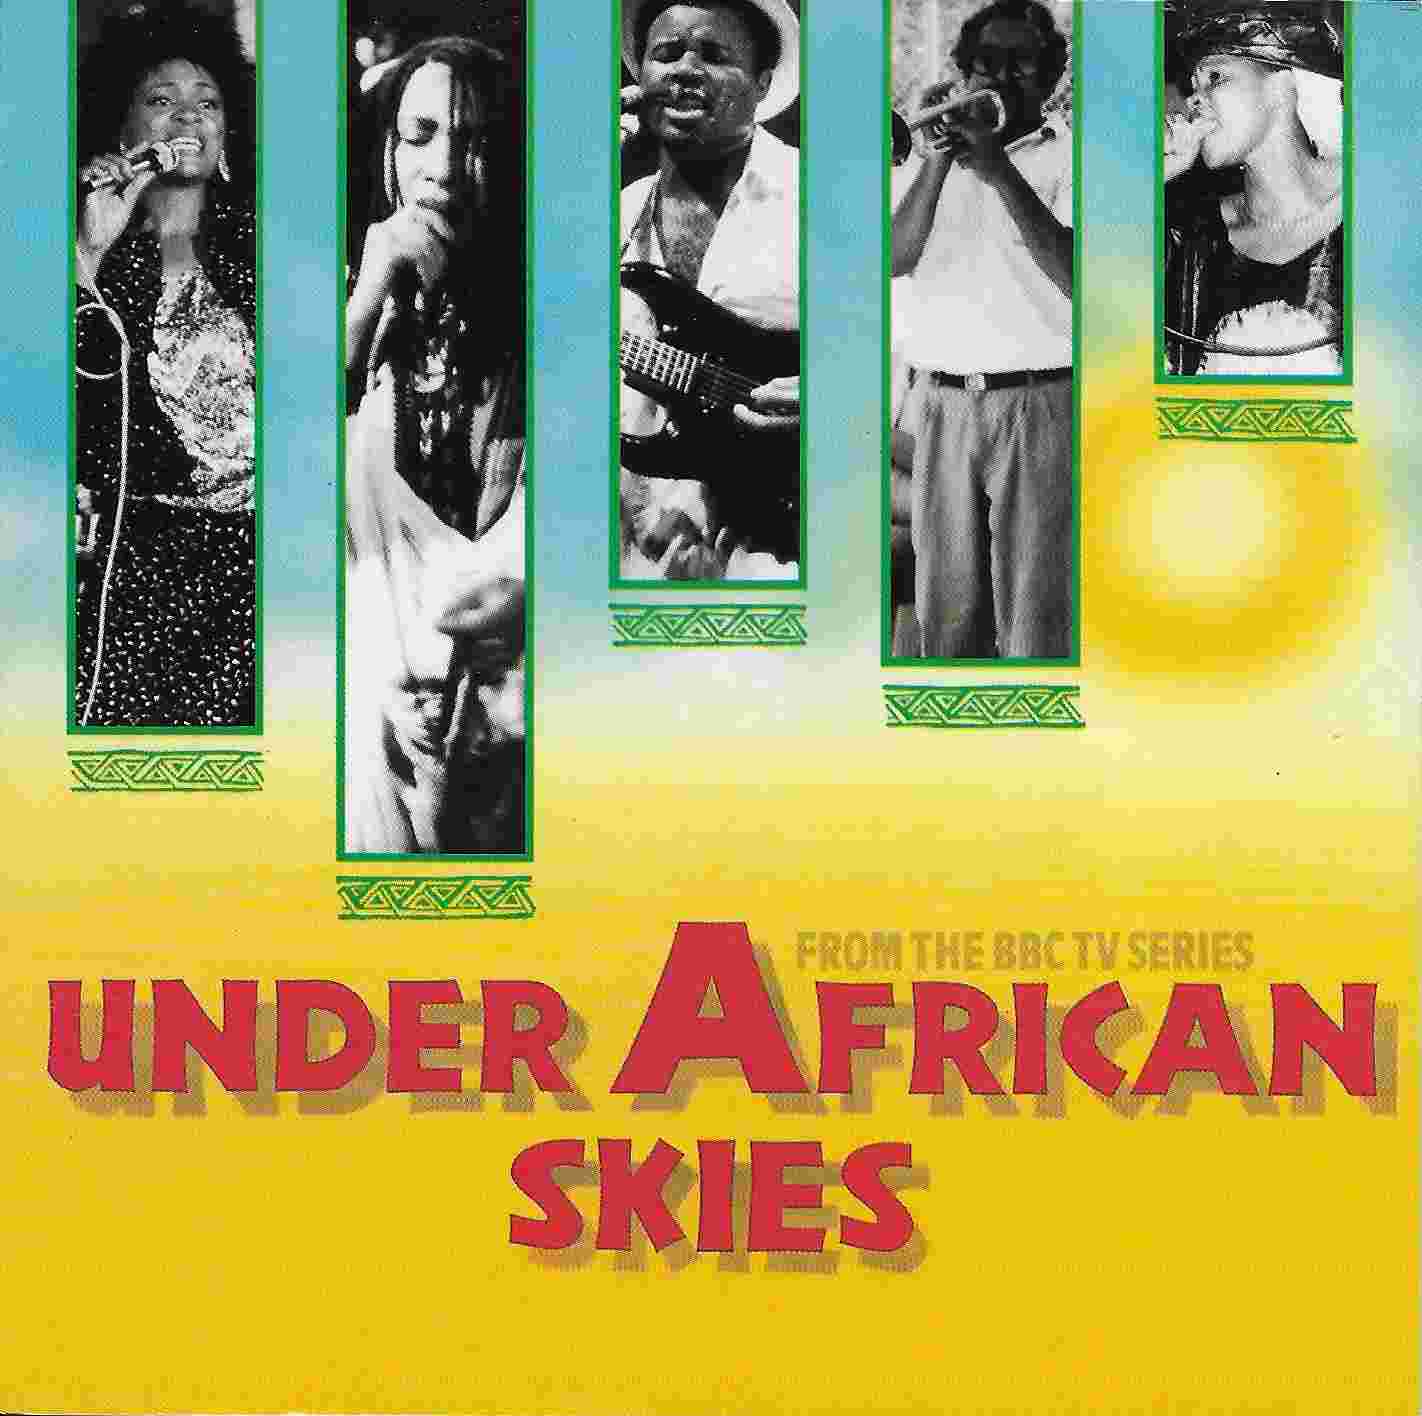 Picture of BBCCD2006 Under African skies by artist Various from the BBC cds - Records and Tapes library